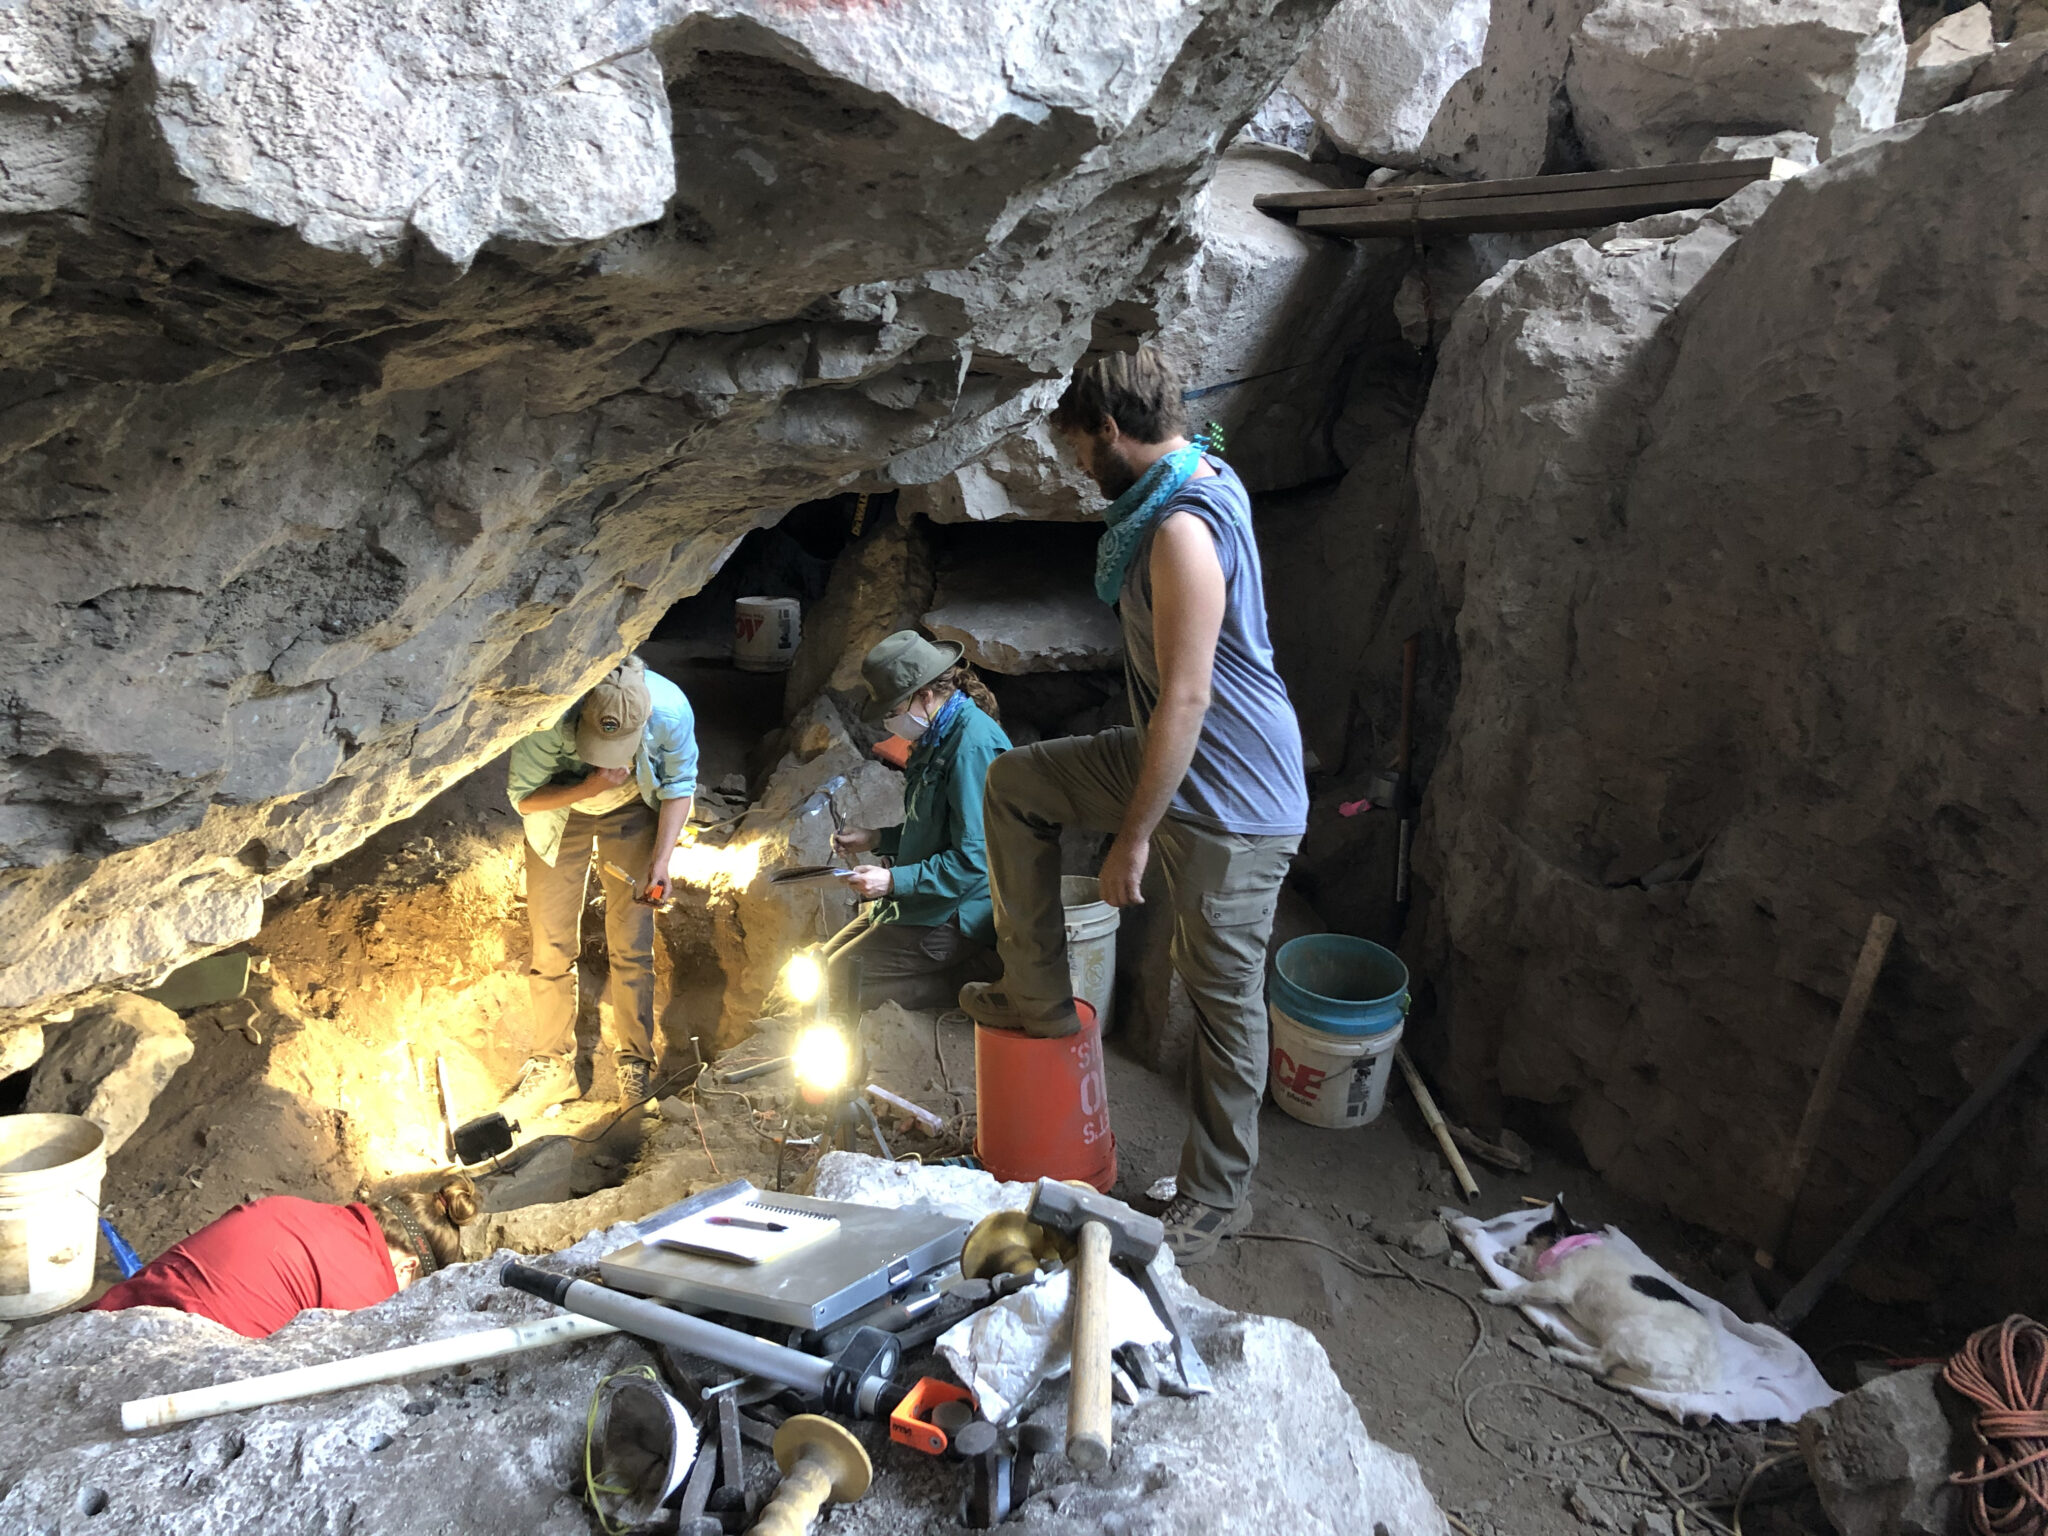 People in a rockshelter archaeological site.